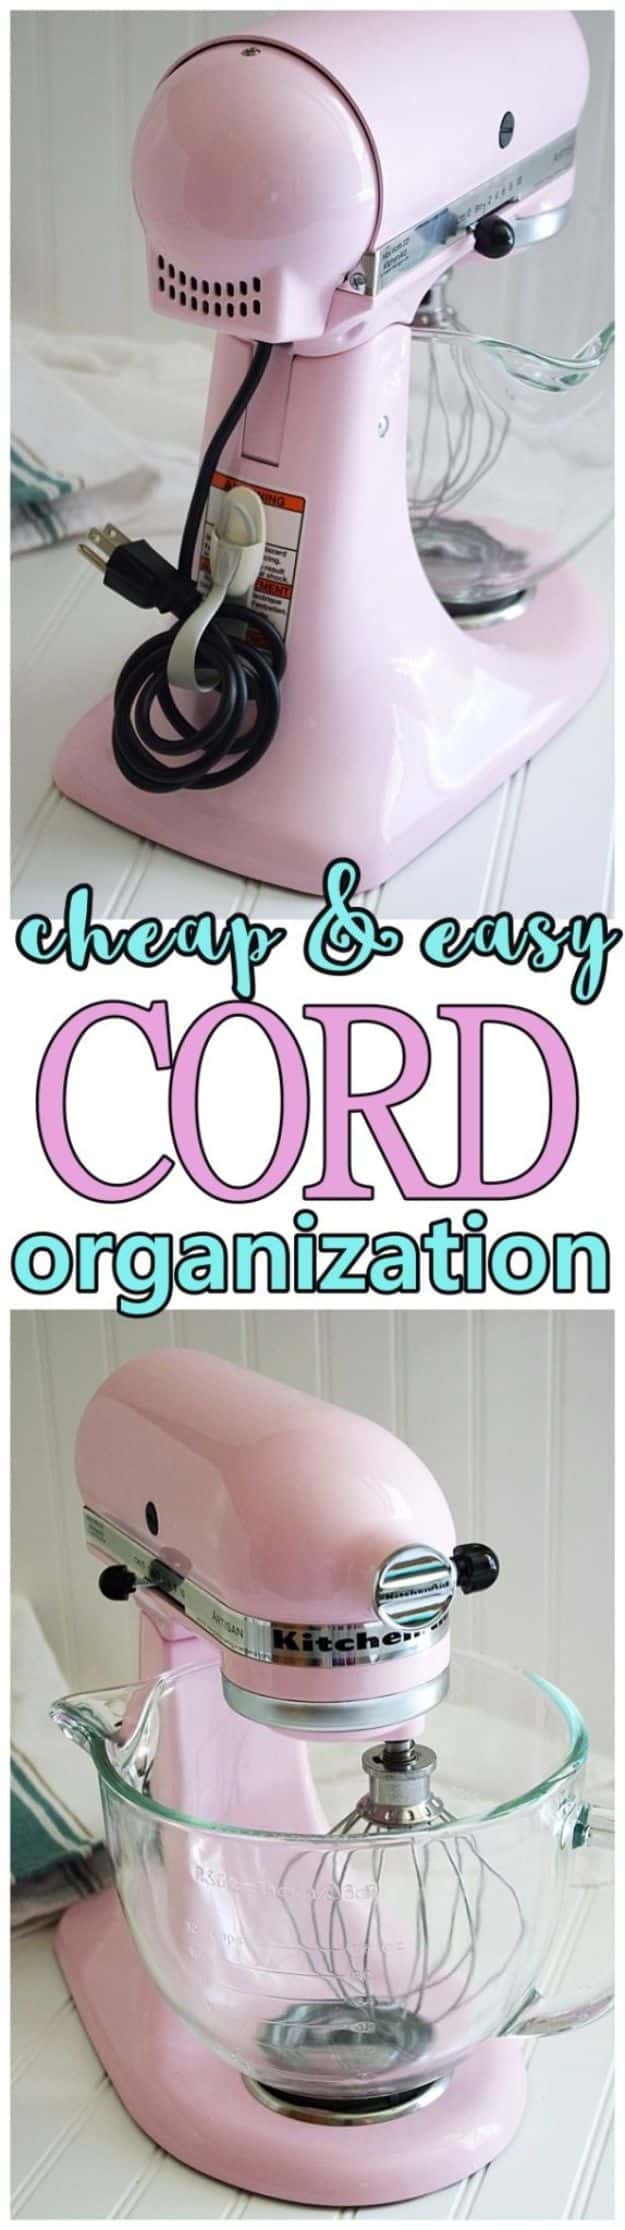 Dollar Store Organizing Ideas - Small Kitchen Appliance and Power Tool Cord Organization - Easy Organization Projects from Dollar Tree and Dollar Stores - Quick Closet Makeovers, Pantry Storage, Shoe Box Projects, Tension Rods, Car and Household Cleaning - Hacks and Tips for Organizing on a Budget - Cheap Idea for Reducing Clutter around the House, in the Kitchen and Bedroom http://diyjoy.com/dollar-store-organizing-ideas